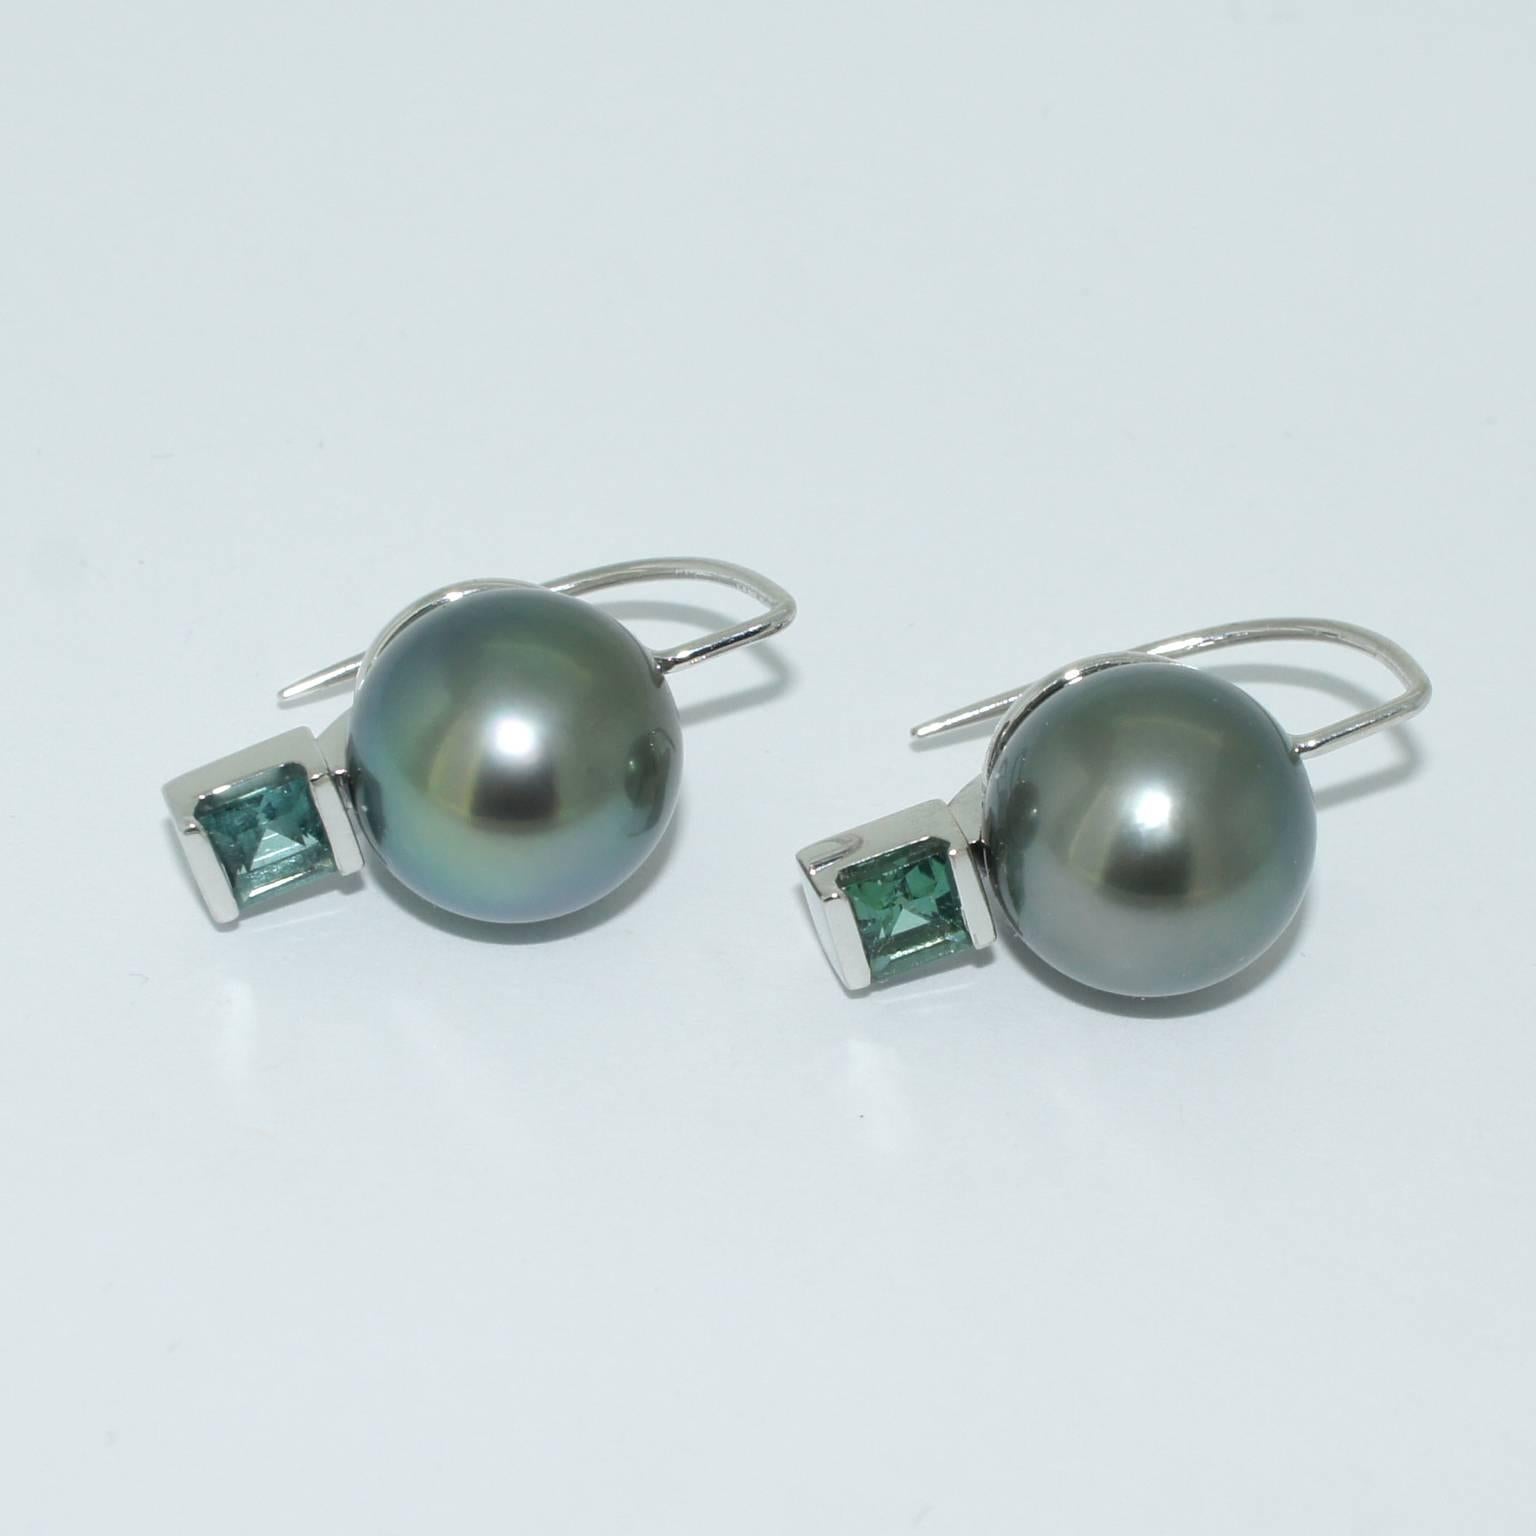 These elegant pearl earrings are handmade in our Sydney studios in 18 karat white gold, and set with a pair of natural grey Tahitian pearls of excellent lustre and colour and two square cut natural teal tourmalines. Infinitely wearable from day to